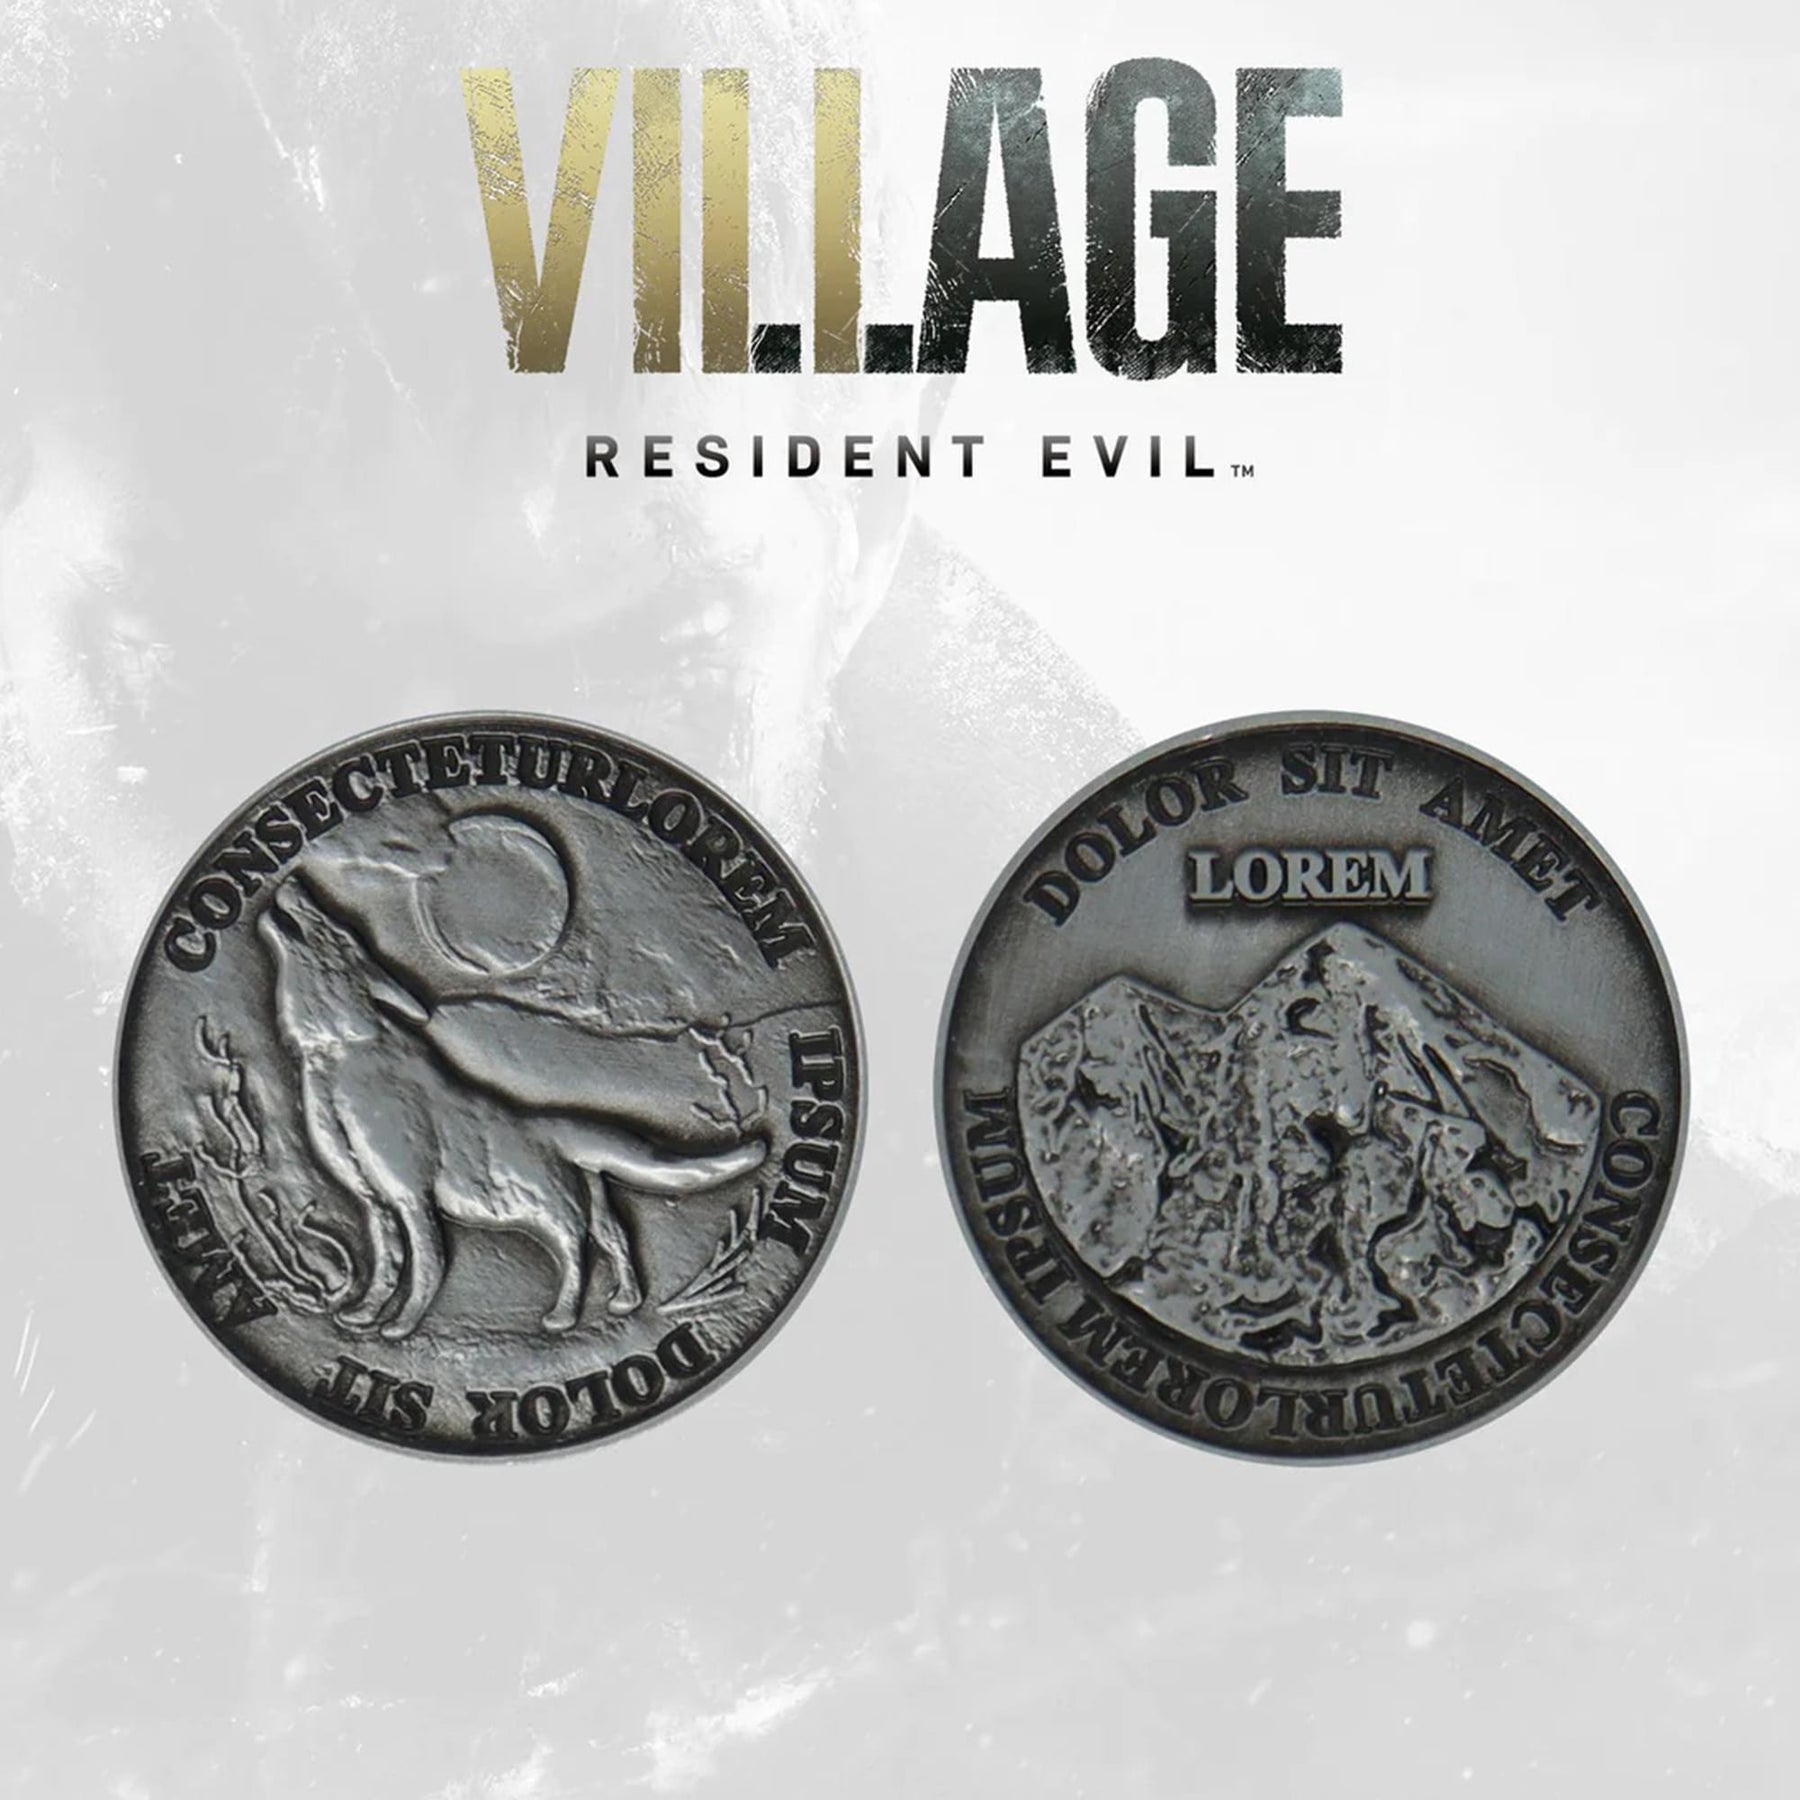 Resident Evil Village Limited Edition Replica Currency Coin